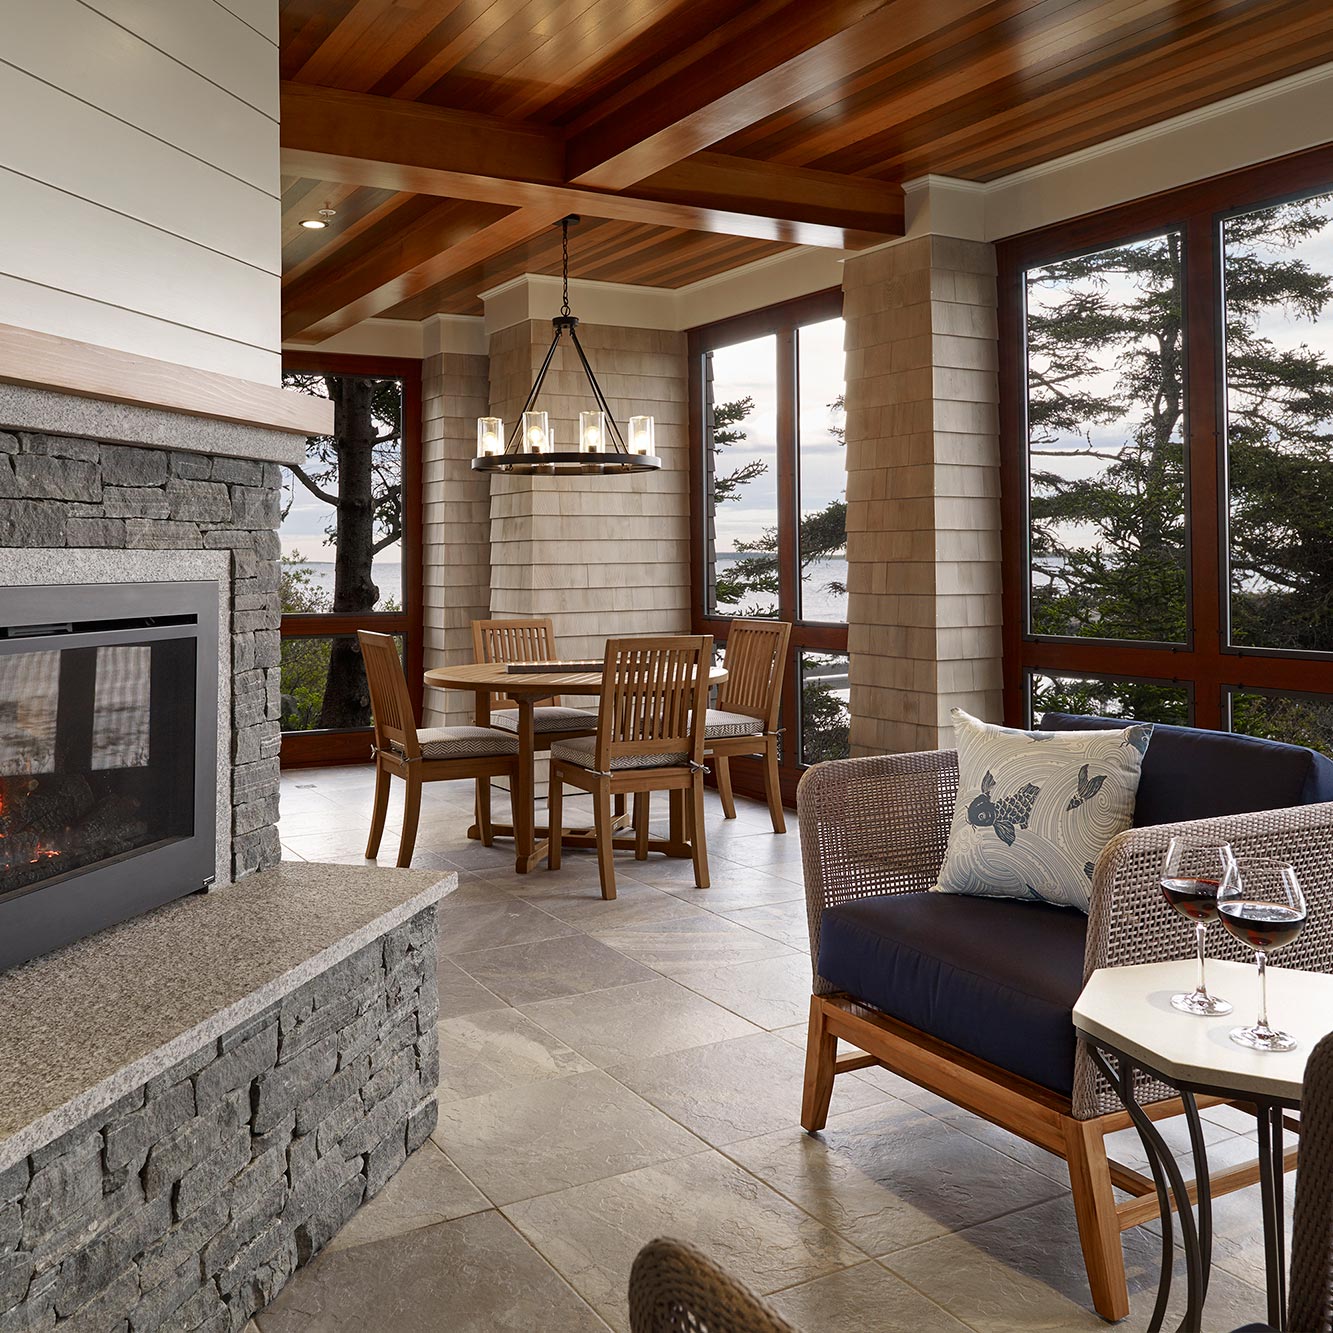 Outdoor fireplace with rustic chandelier, tile and polished wood details, and coastal views.